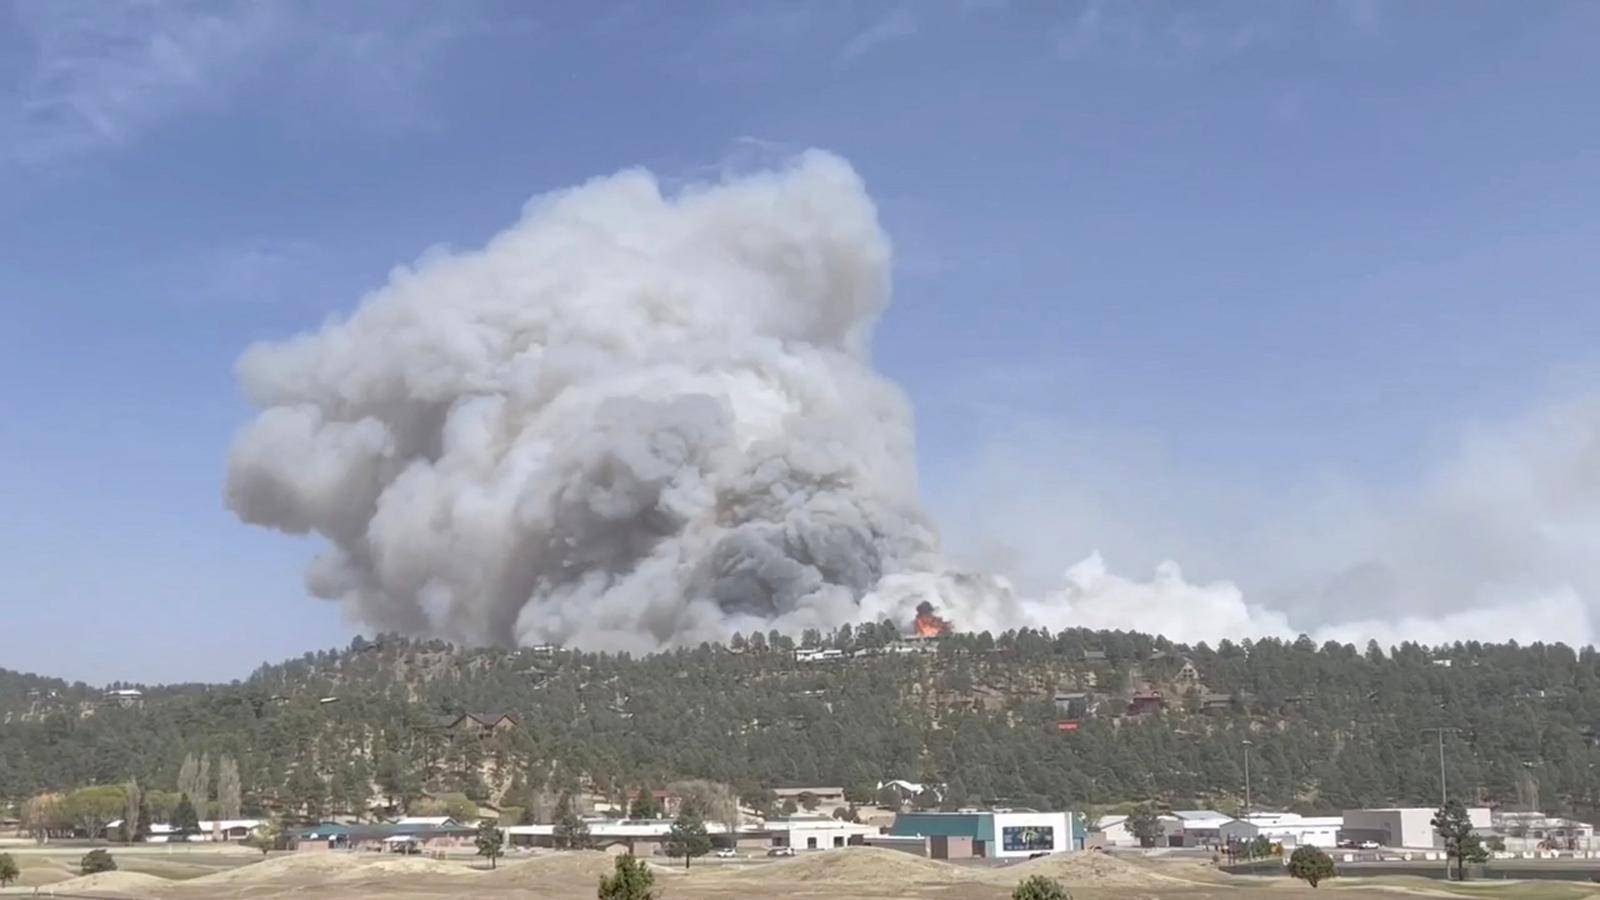 Wildfire burns homes, triggers evacuations in New Mexico town